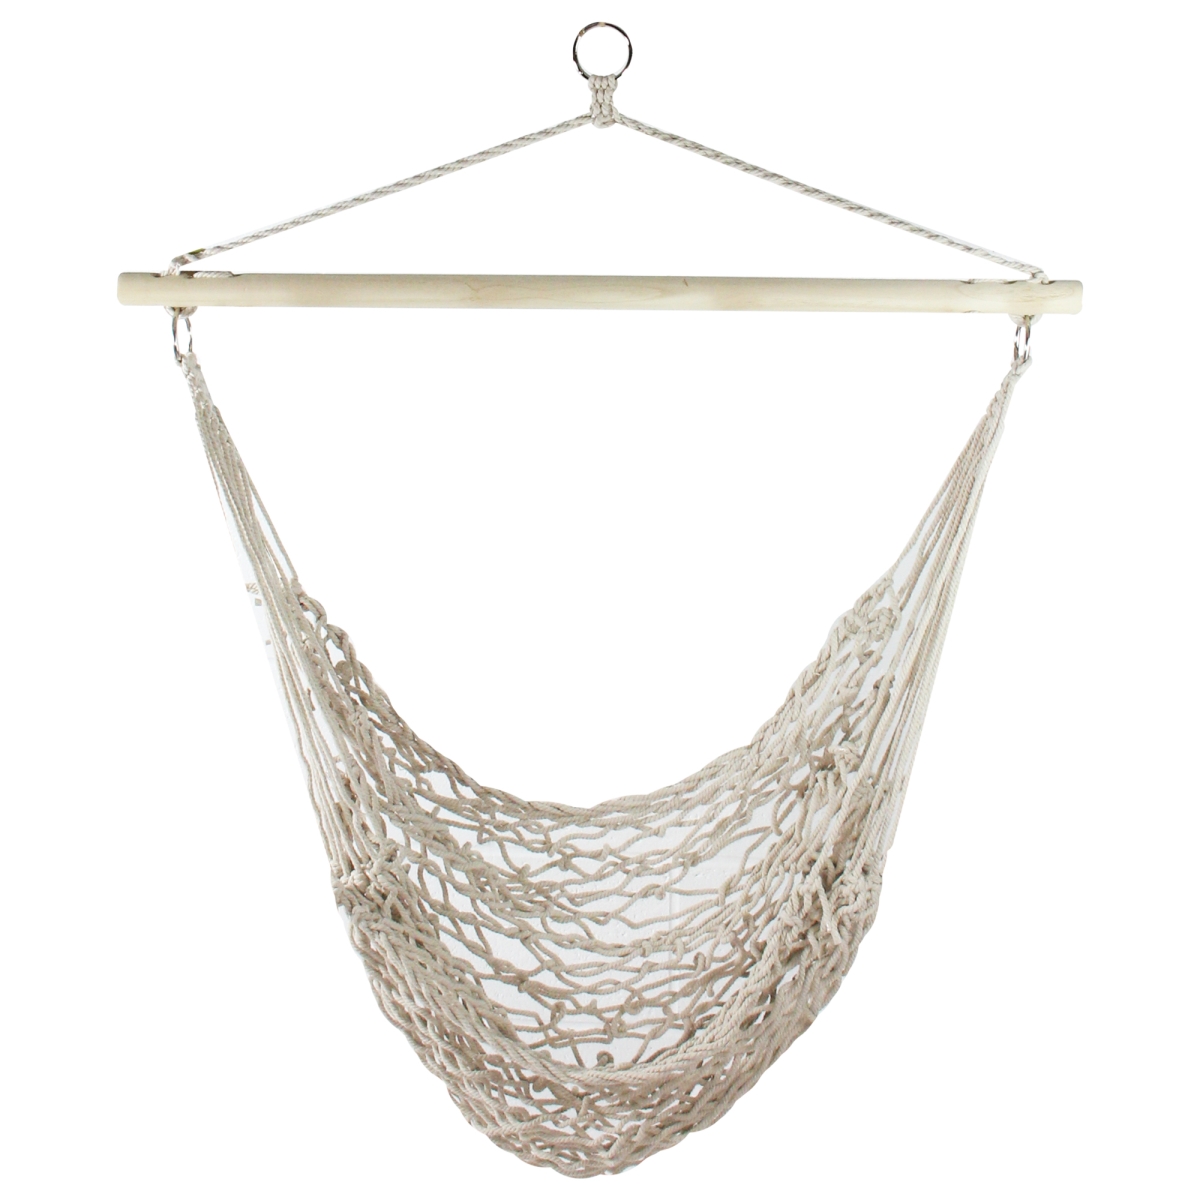 32816644 39 X 43 In. Cotton Netting Hammock Chair With Wooden Bar, White